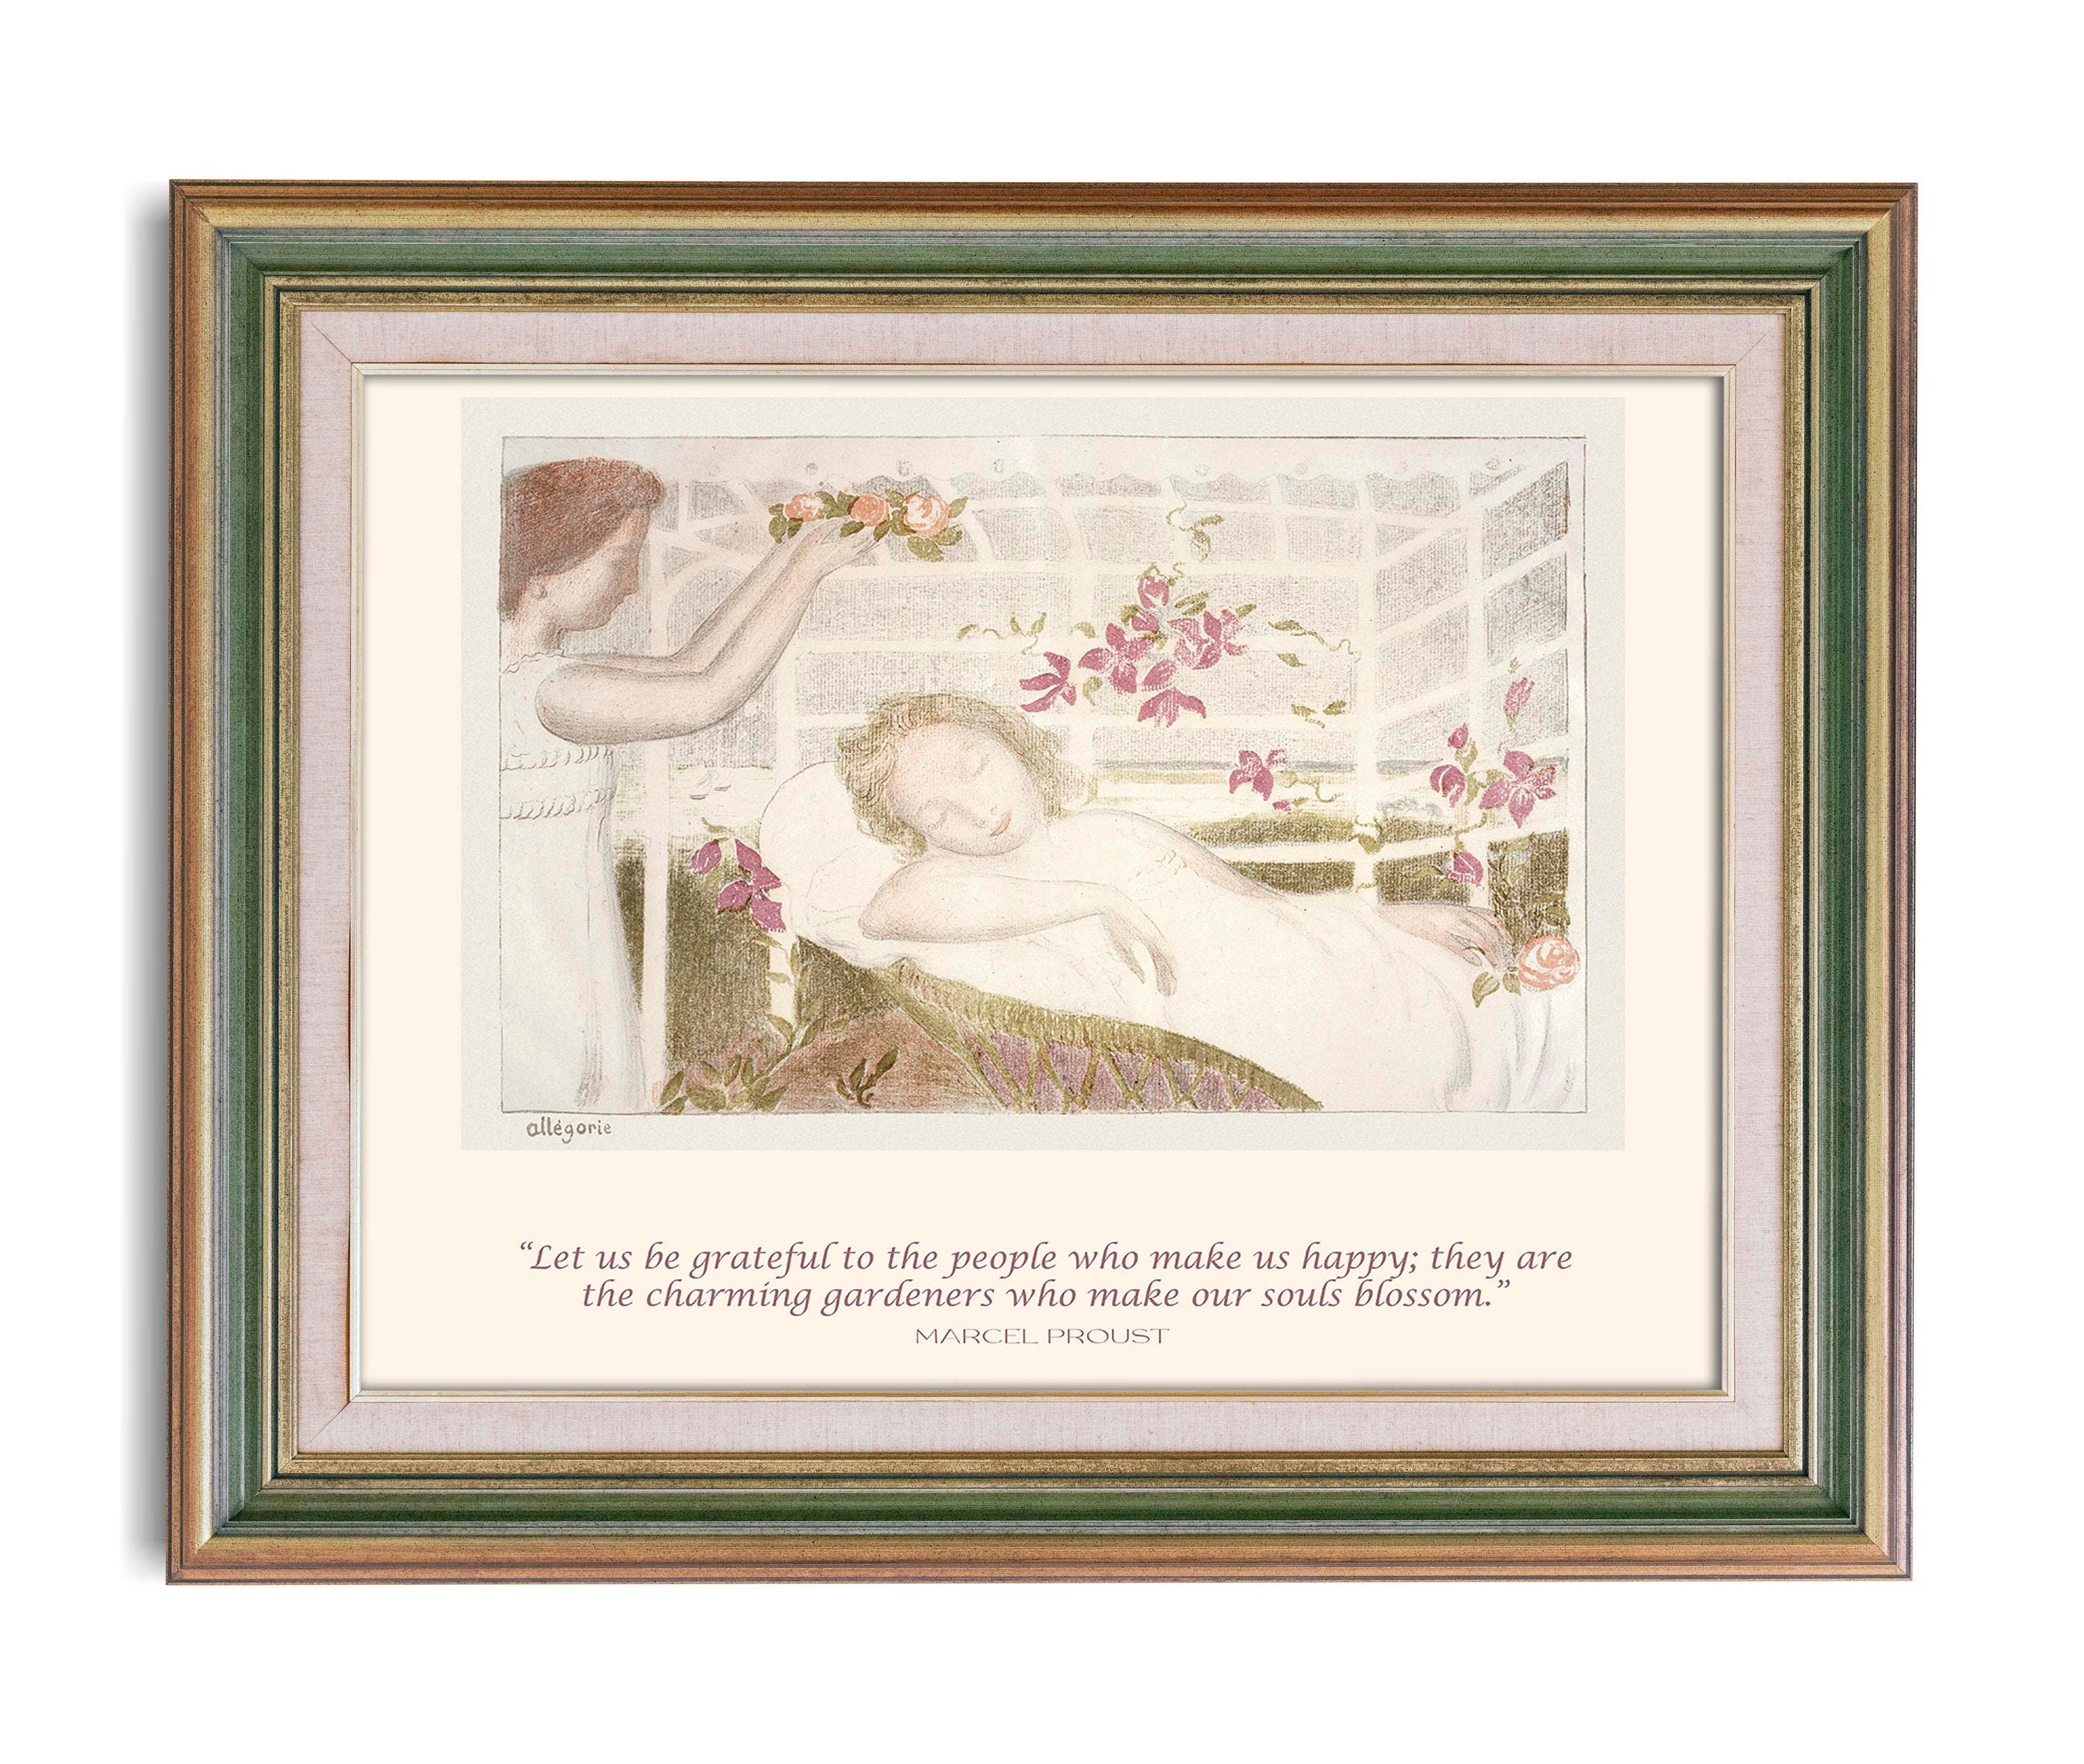 Marcel Proust Inspirational Gratitude Quote, Maurice Denis Fine Art Prints - Be grateful to the people who make us happy